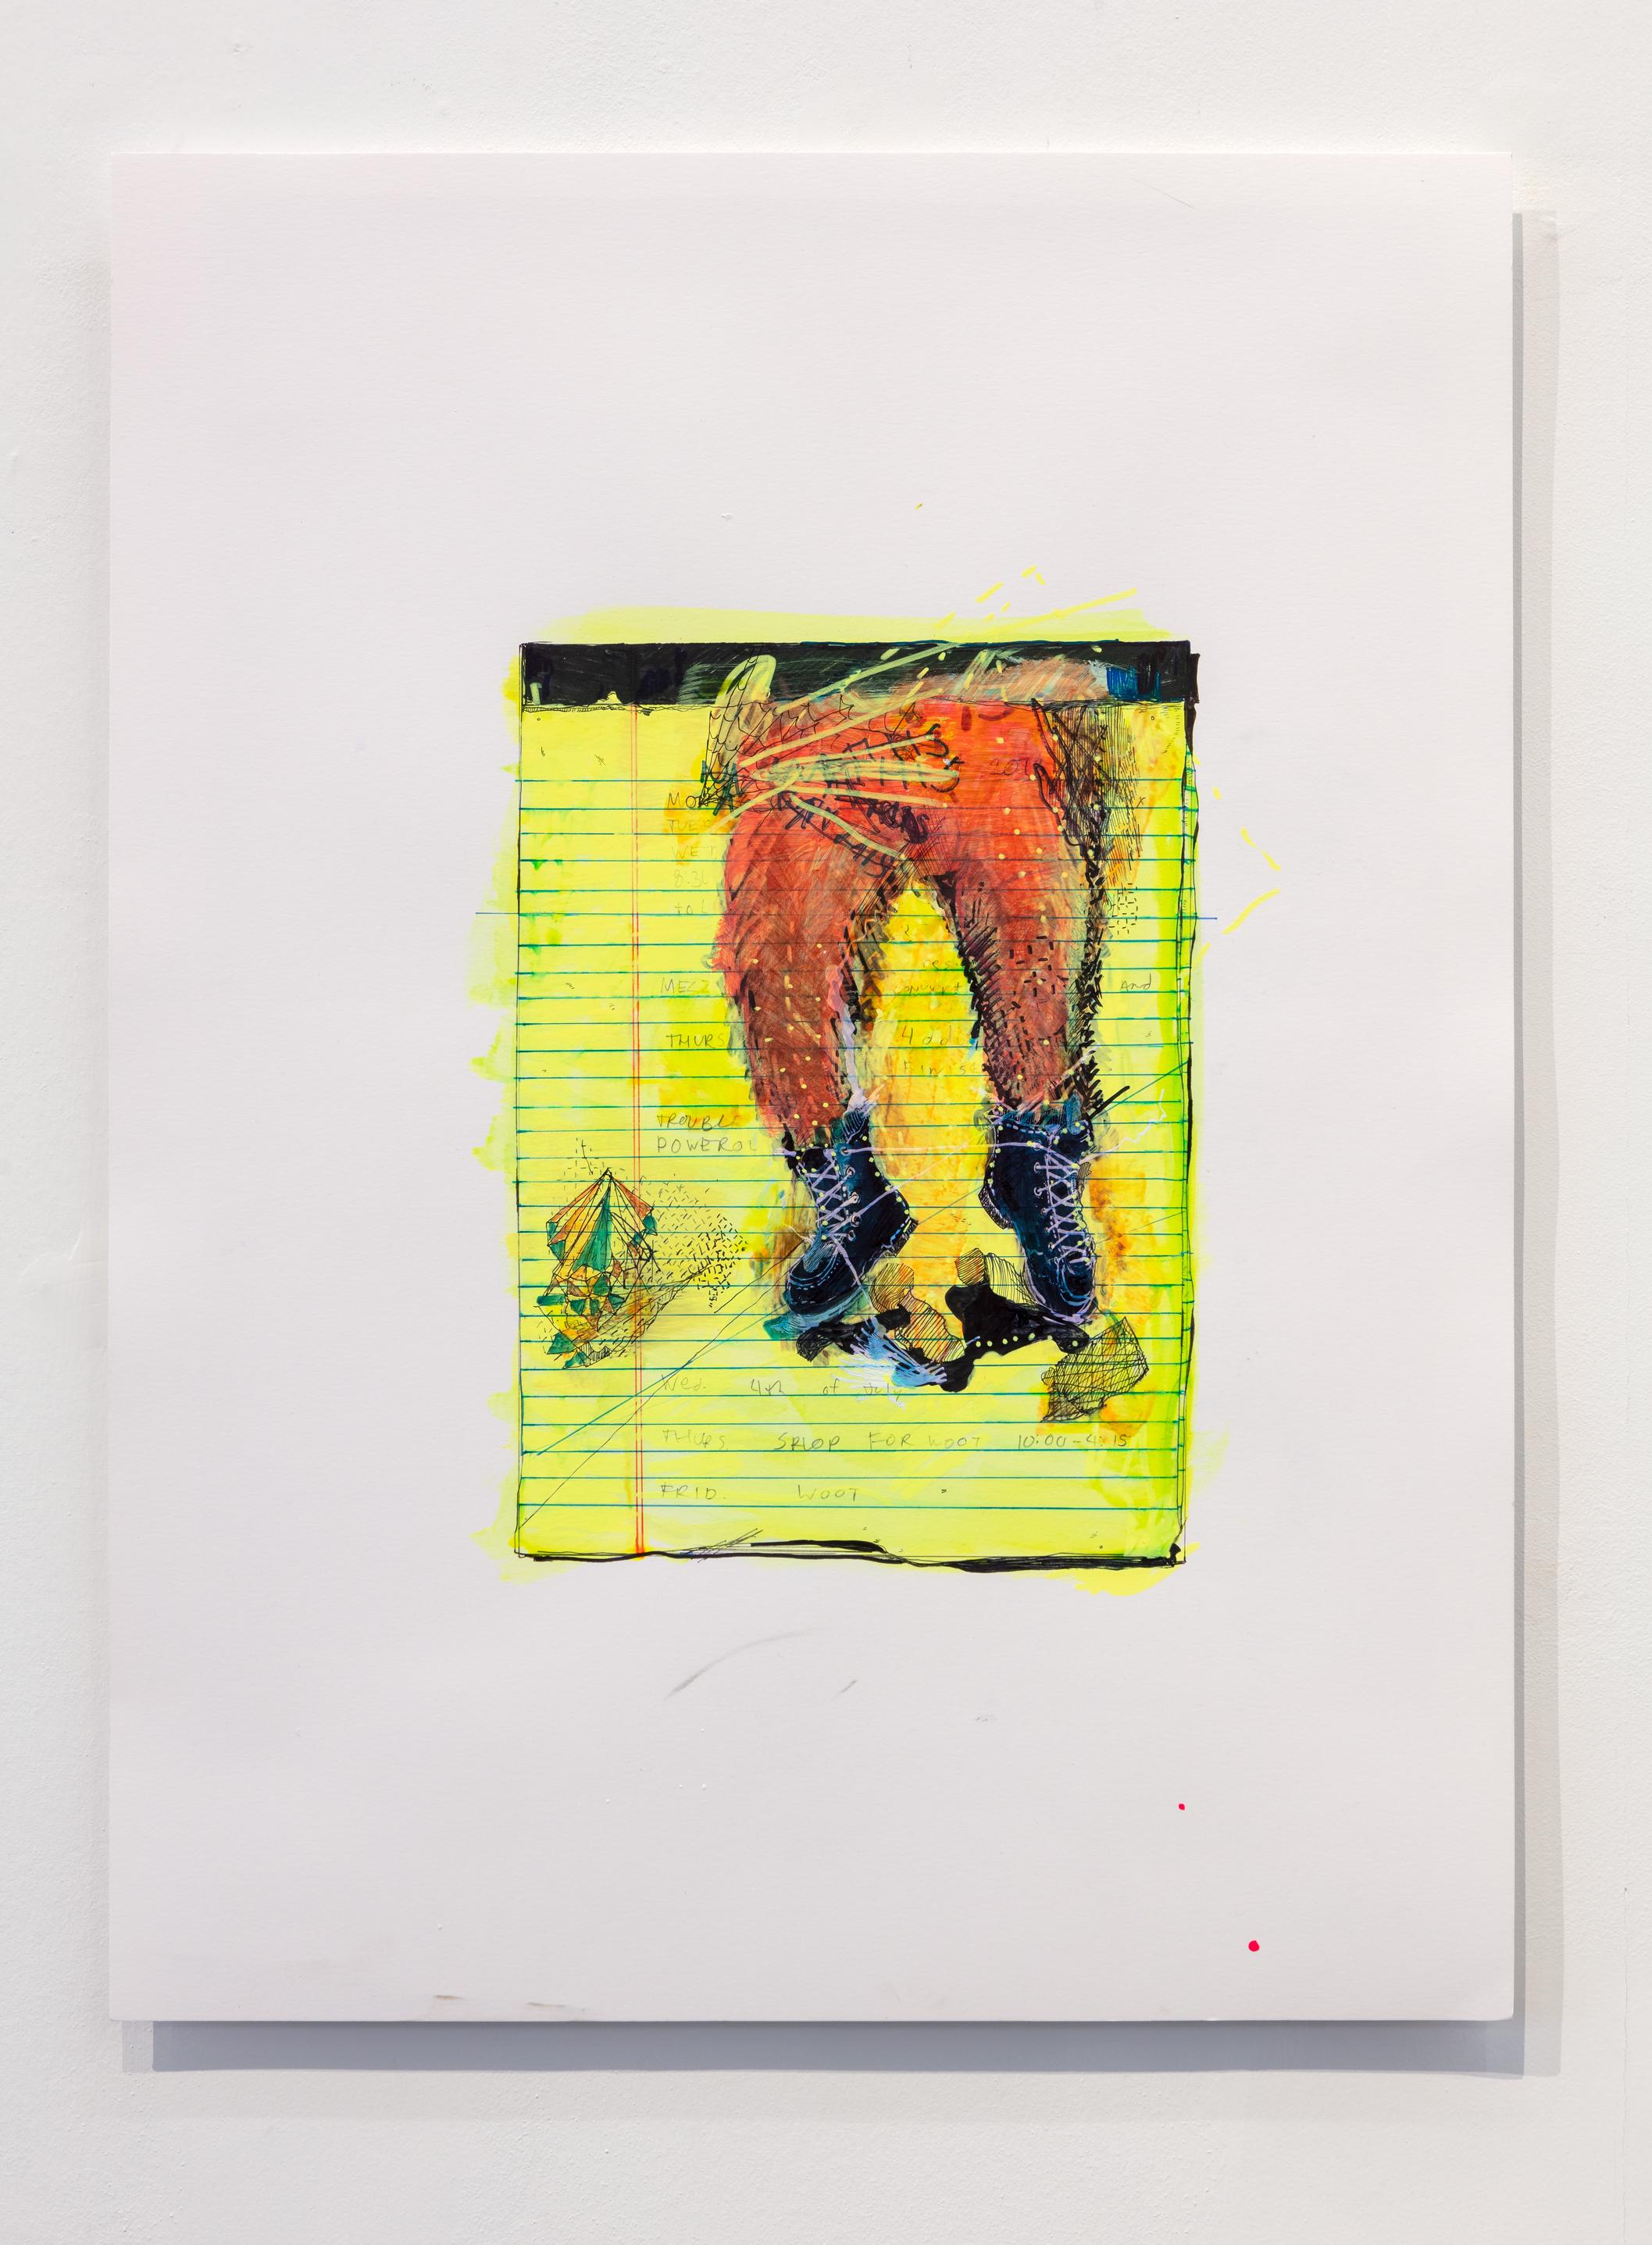 Mathis translates his personal notebook doodles and notes into personal artifacts and figurative works. Lacking the figurative lines typically used to carry the weight and innate presence of two dimensional representation, Mathis’ works are both